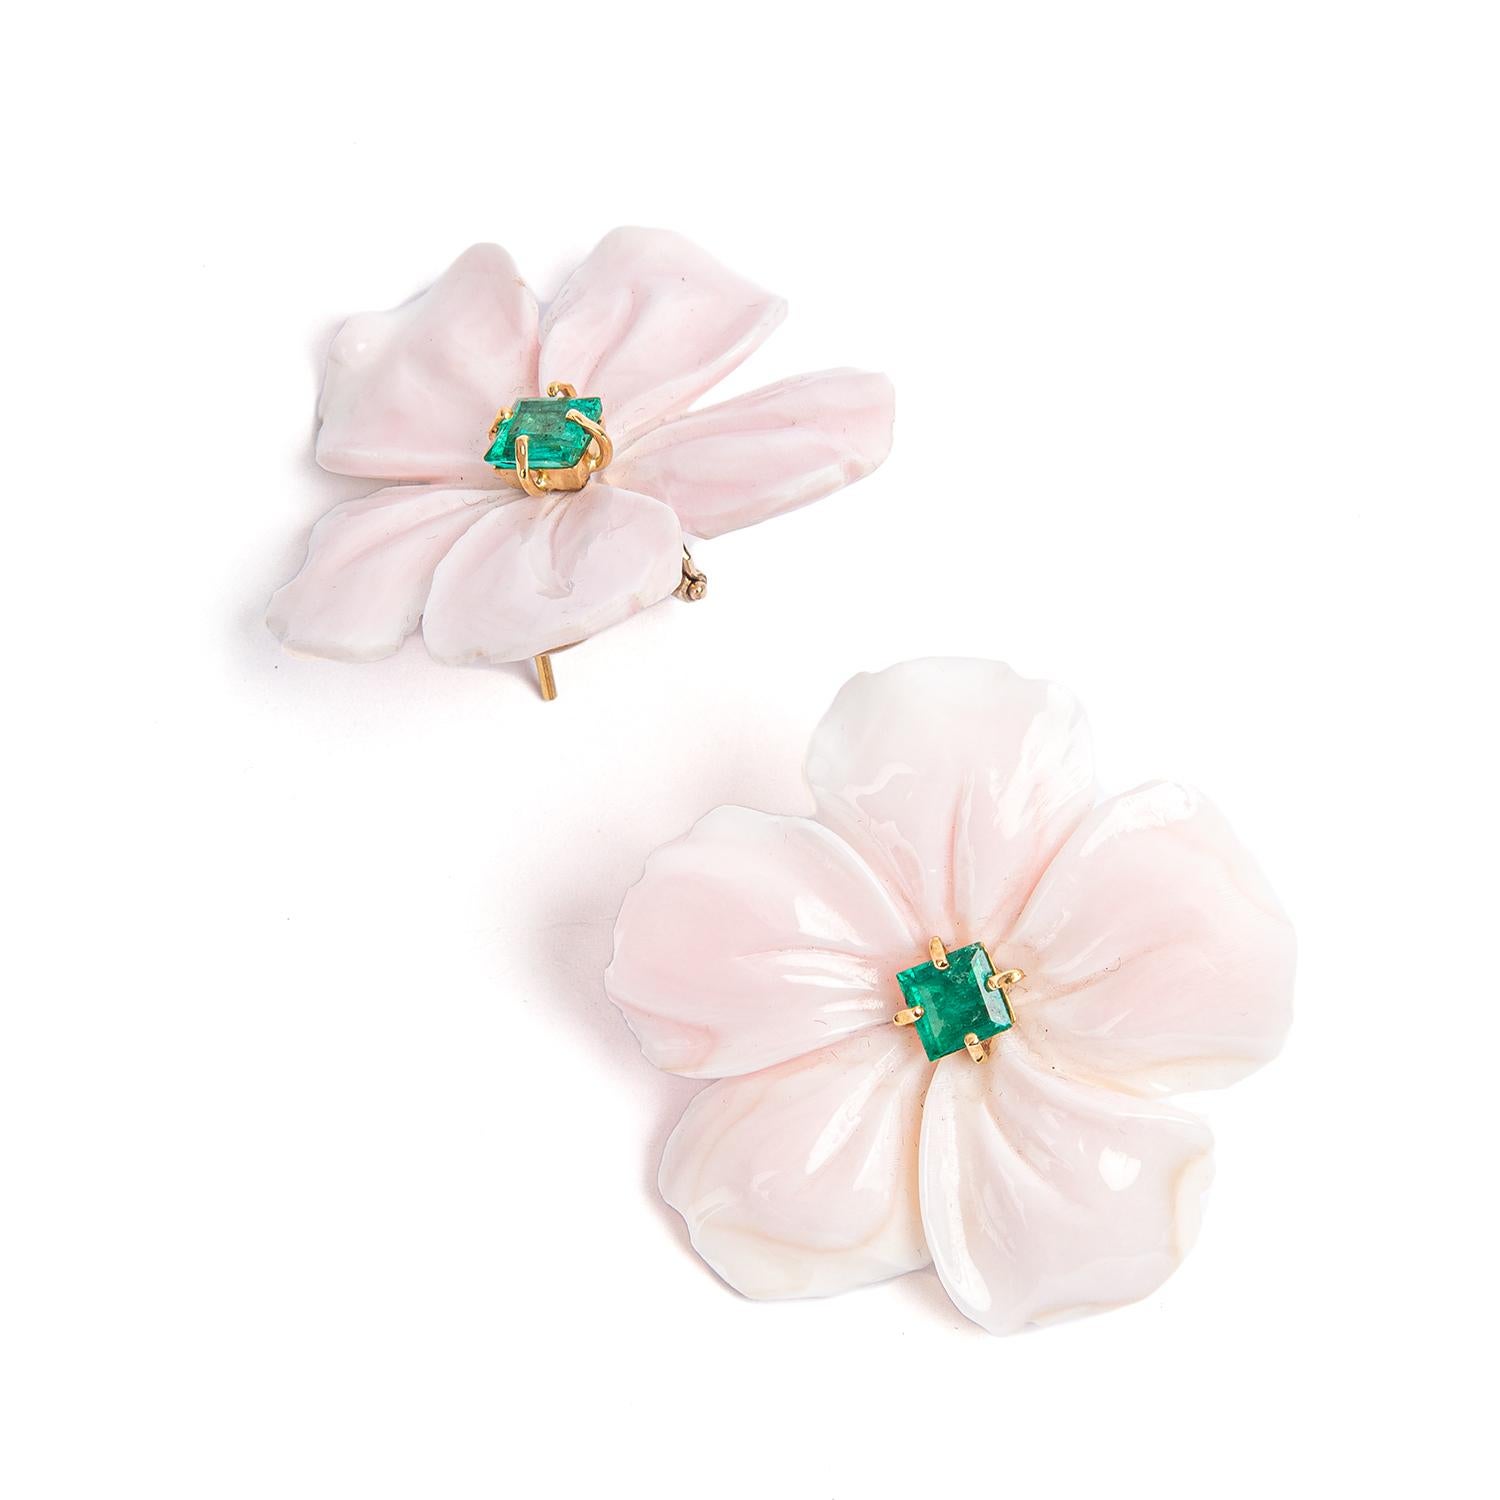 Shell Flower Earrings by Regina Gambatesa at Second Petale Gallery

About the Gemstones :
Emeralds ct. 1,38
Gold 18 kt, yellow gold

ABOUT the CREATOR
REGINA GAMBATESA: AN ARTIST OF SPIRIT AND FORM
Regina Gambatesa is a jewelry artist who strives to